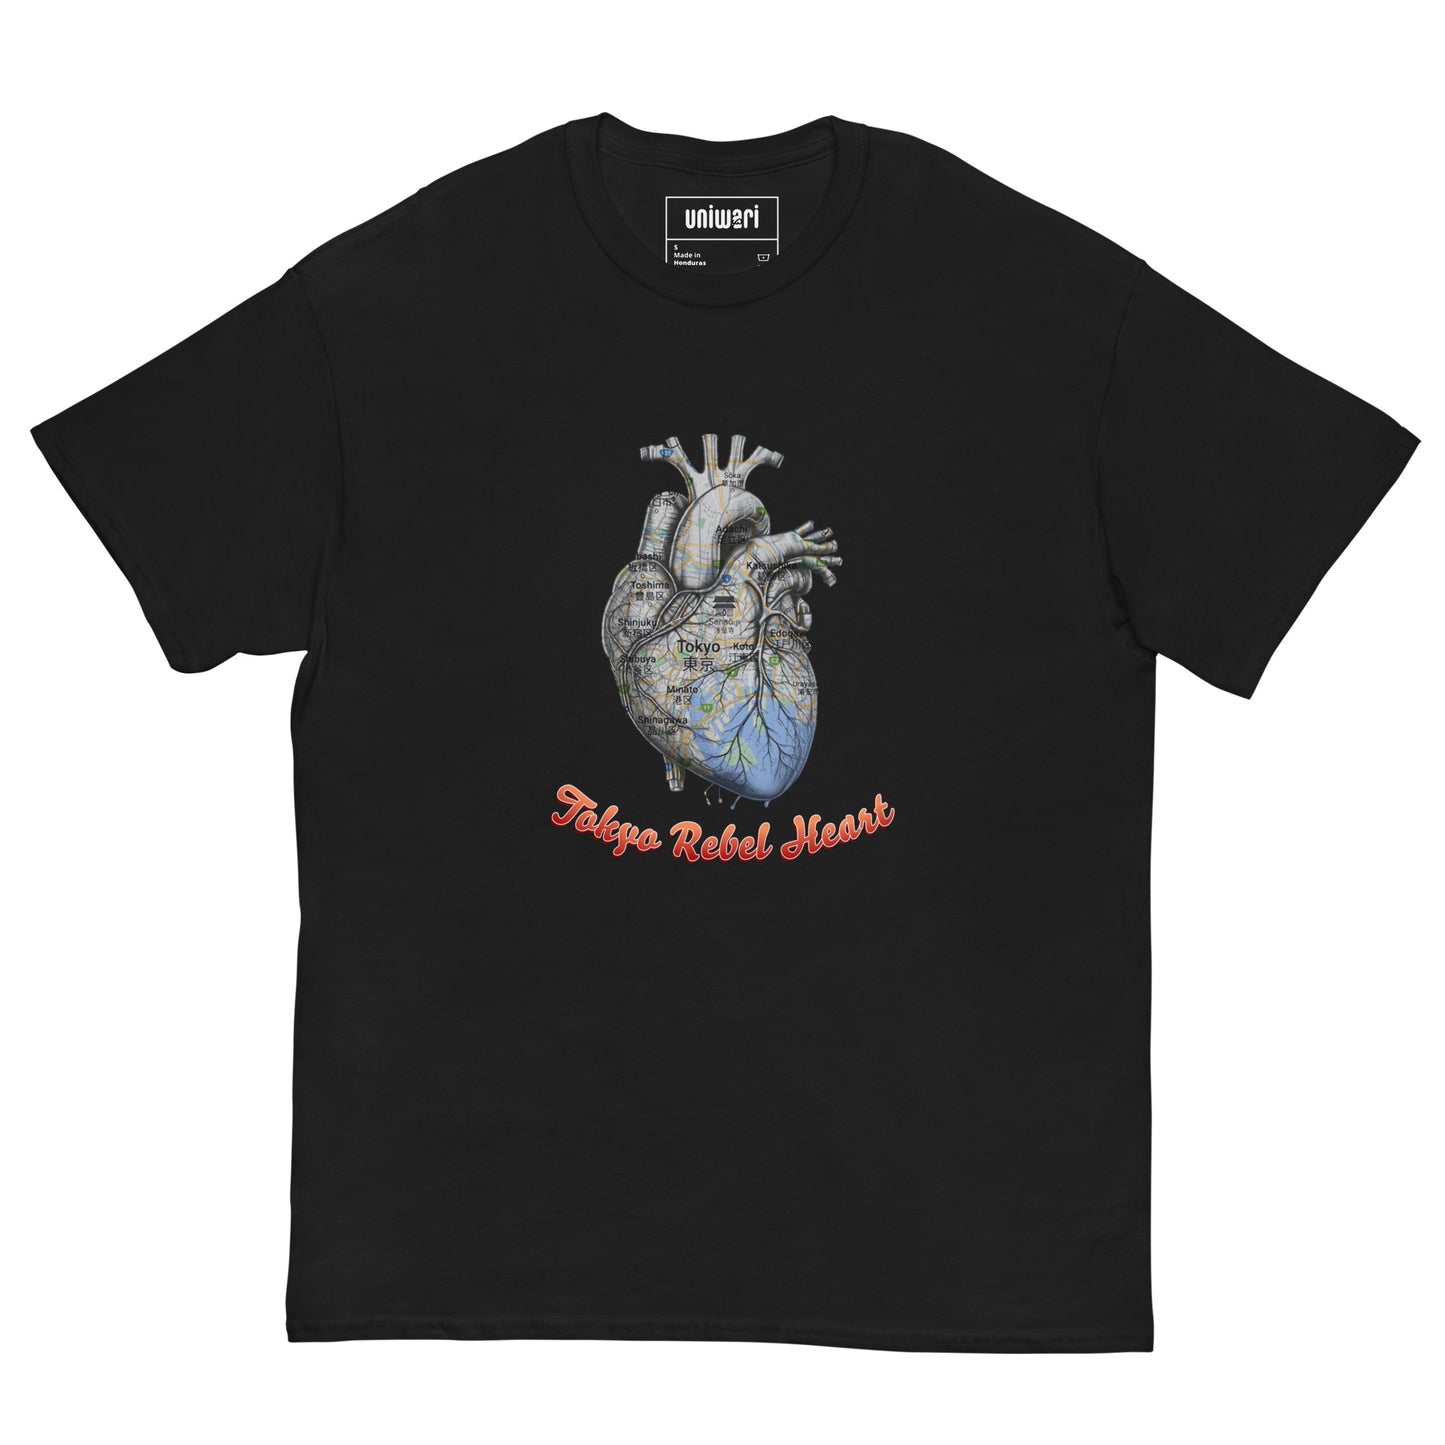 Black High Quality Tee - Front Design with a Heart Shaped Map of Tokyo and a Phrase "Tokyo Rebel Heart" print